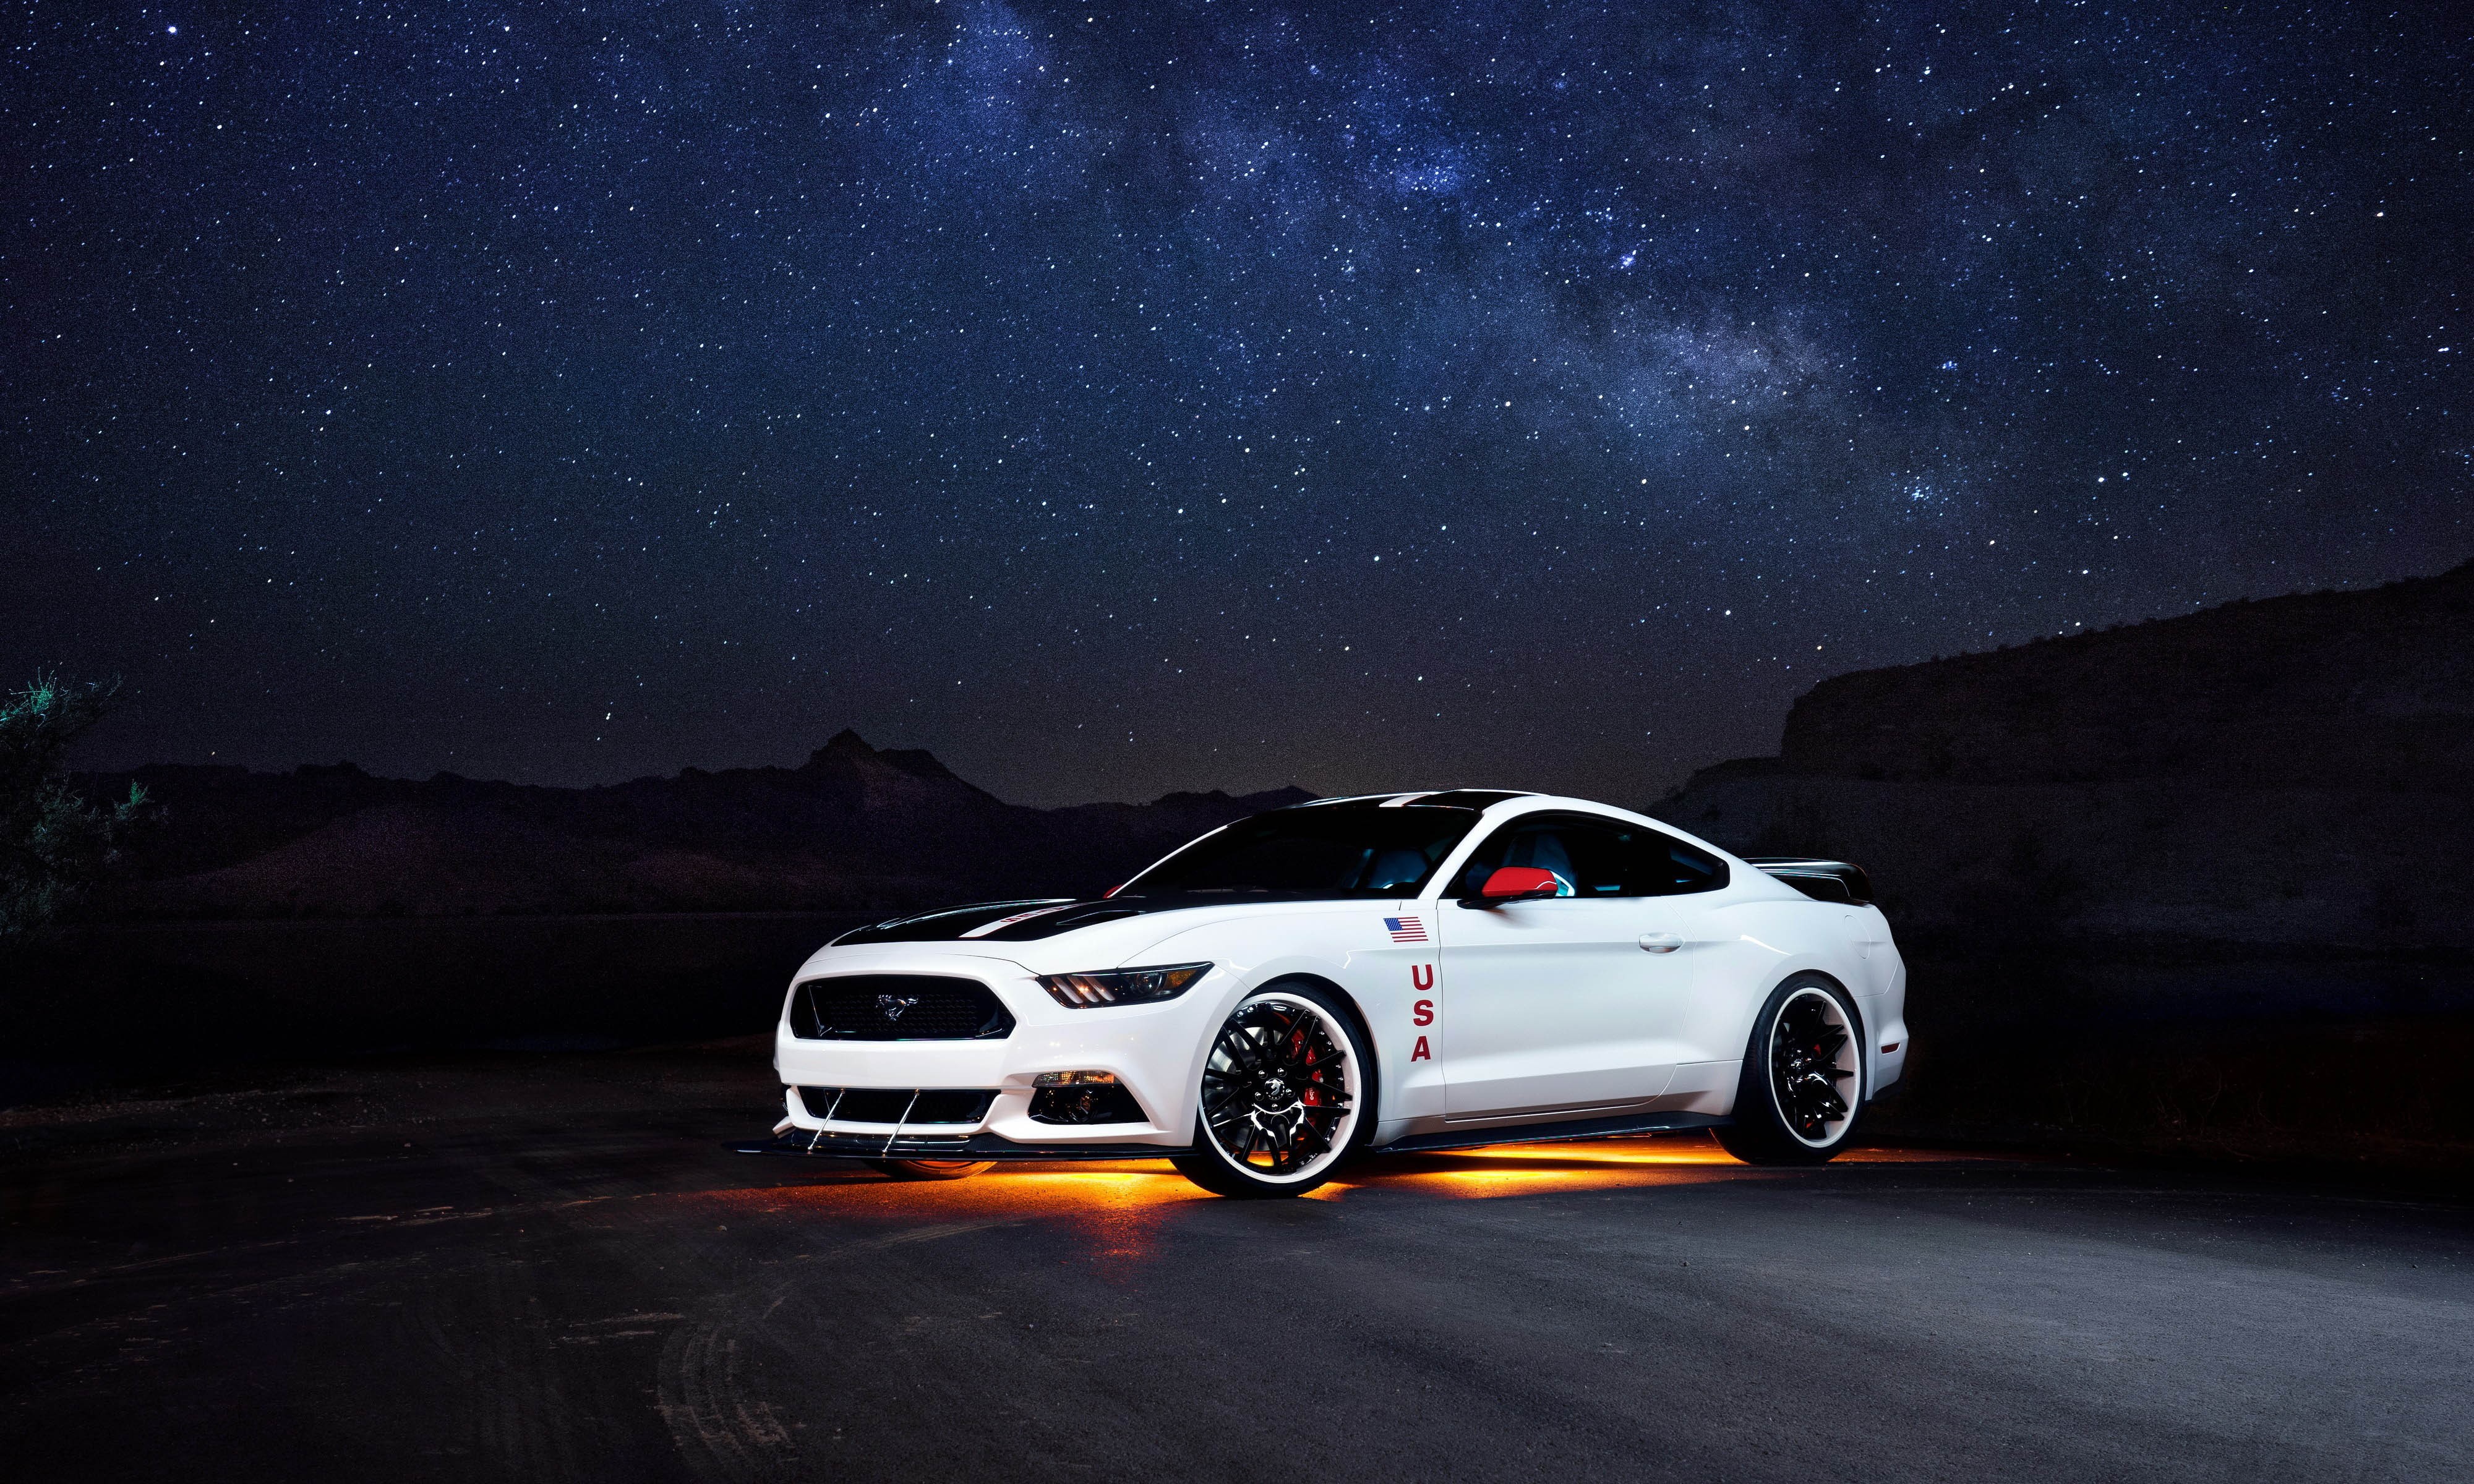 General 4000x2400 Ford Mustang night vehicle white cars car Ford USA starred sky sky stars American flag flag Ford Mustang S550